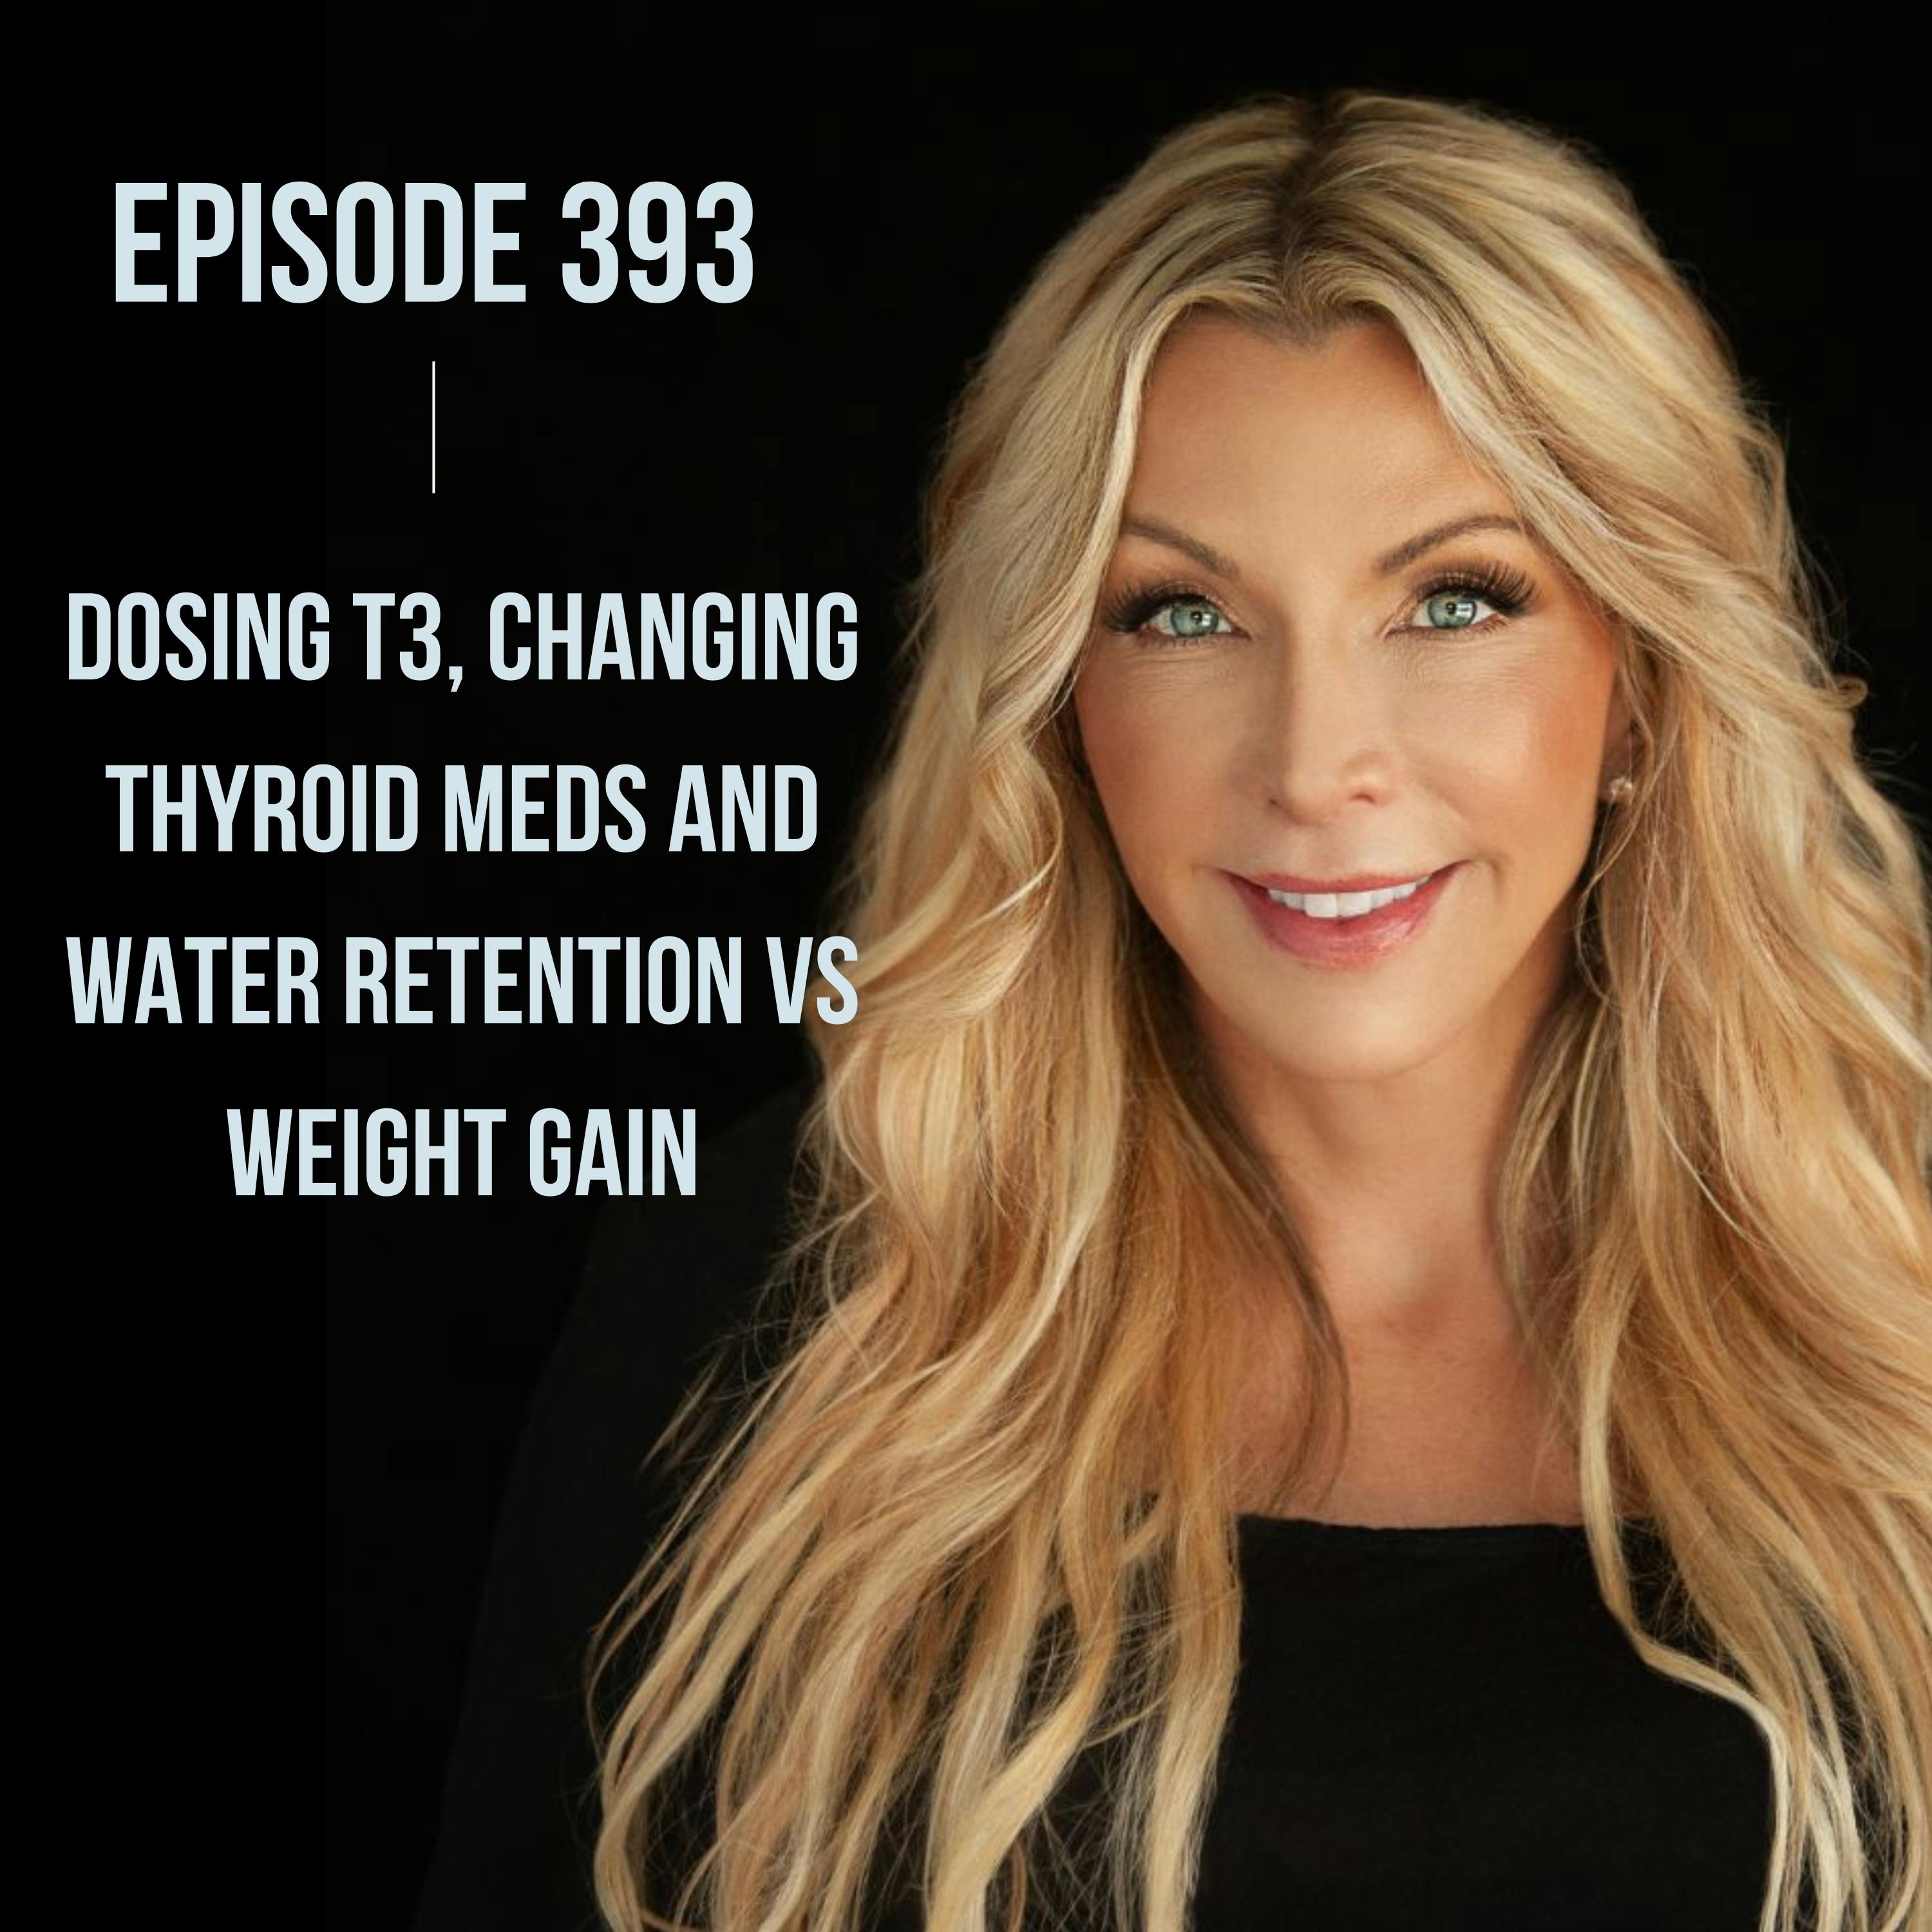 393. Dosing T3, Changing Thyroid Meds and Water Retention vs Weight Gain